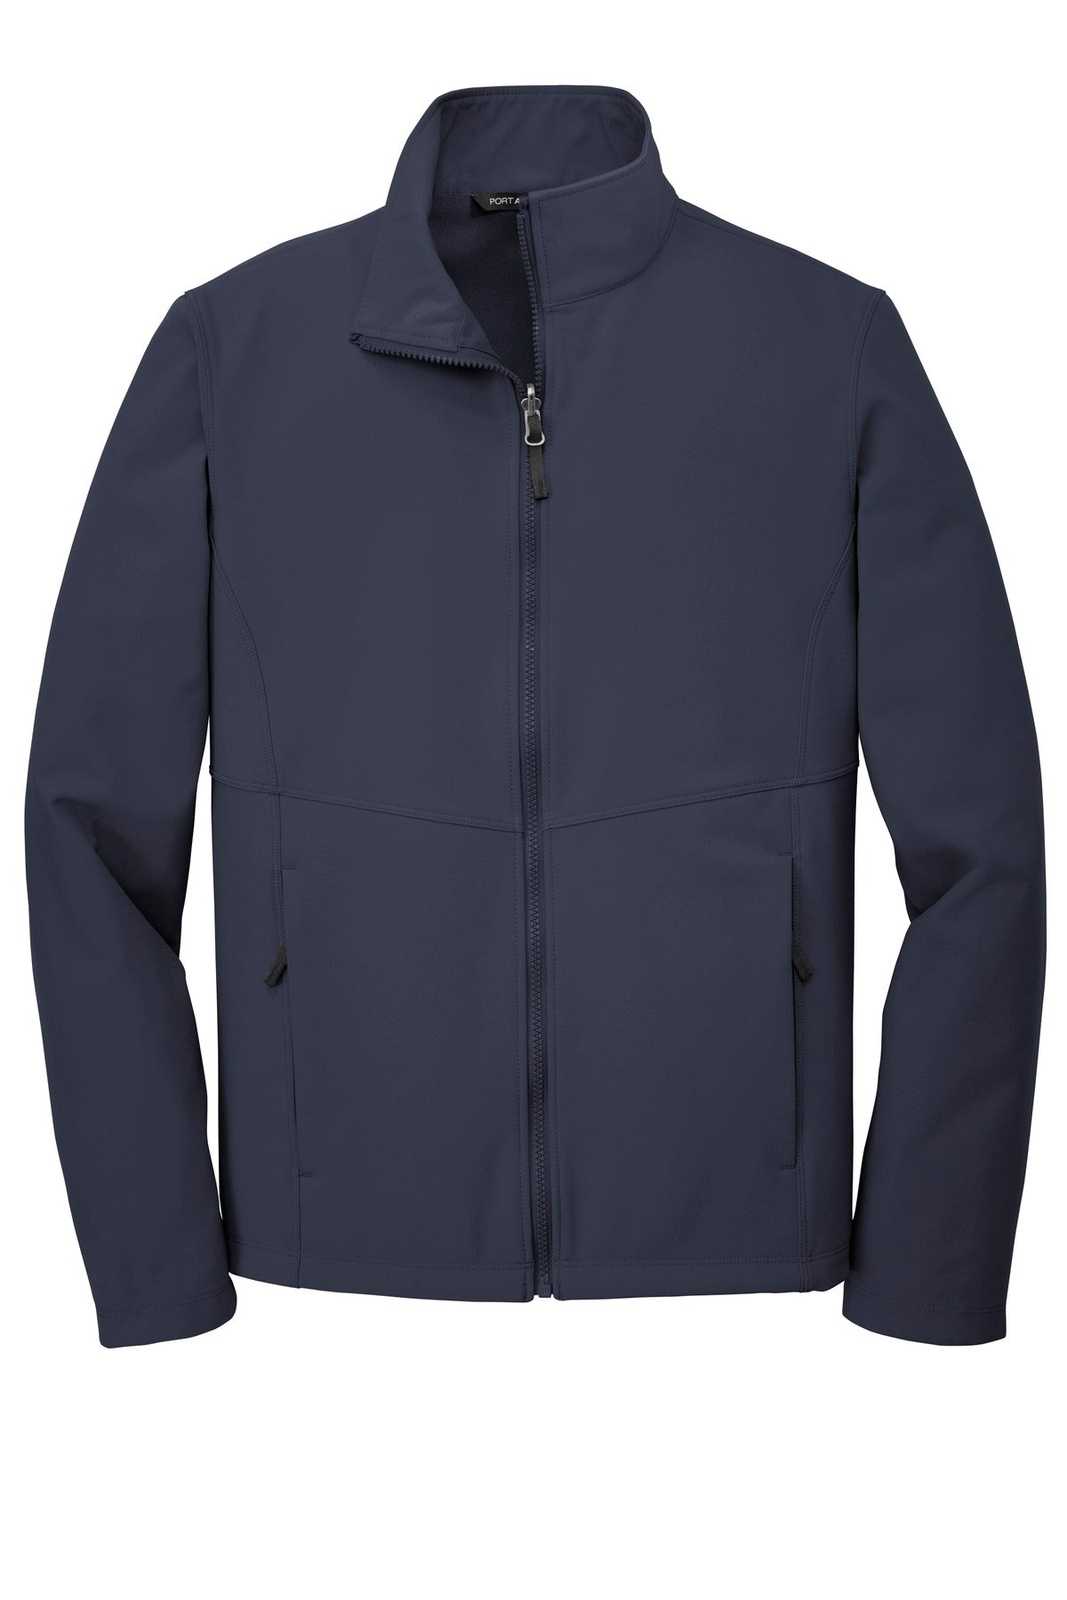 Port Authority J901 Collective Soft Shell Jacket - River Blue Navy - HIT a Double - 5